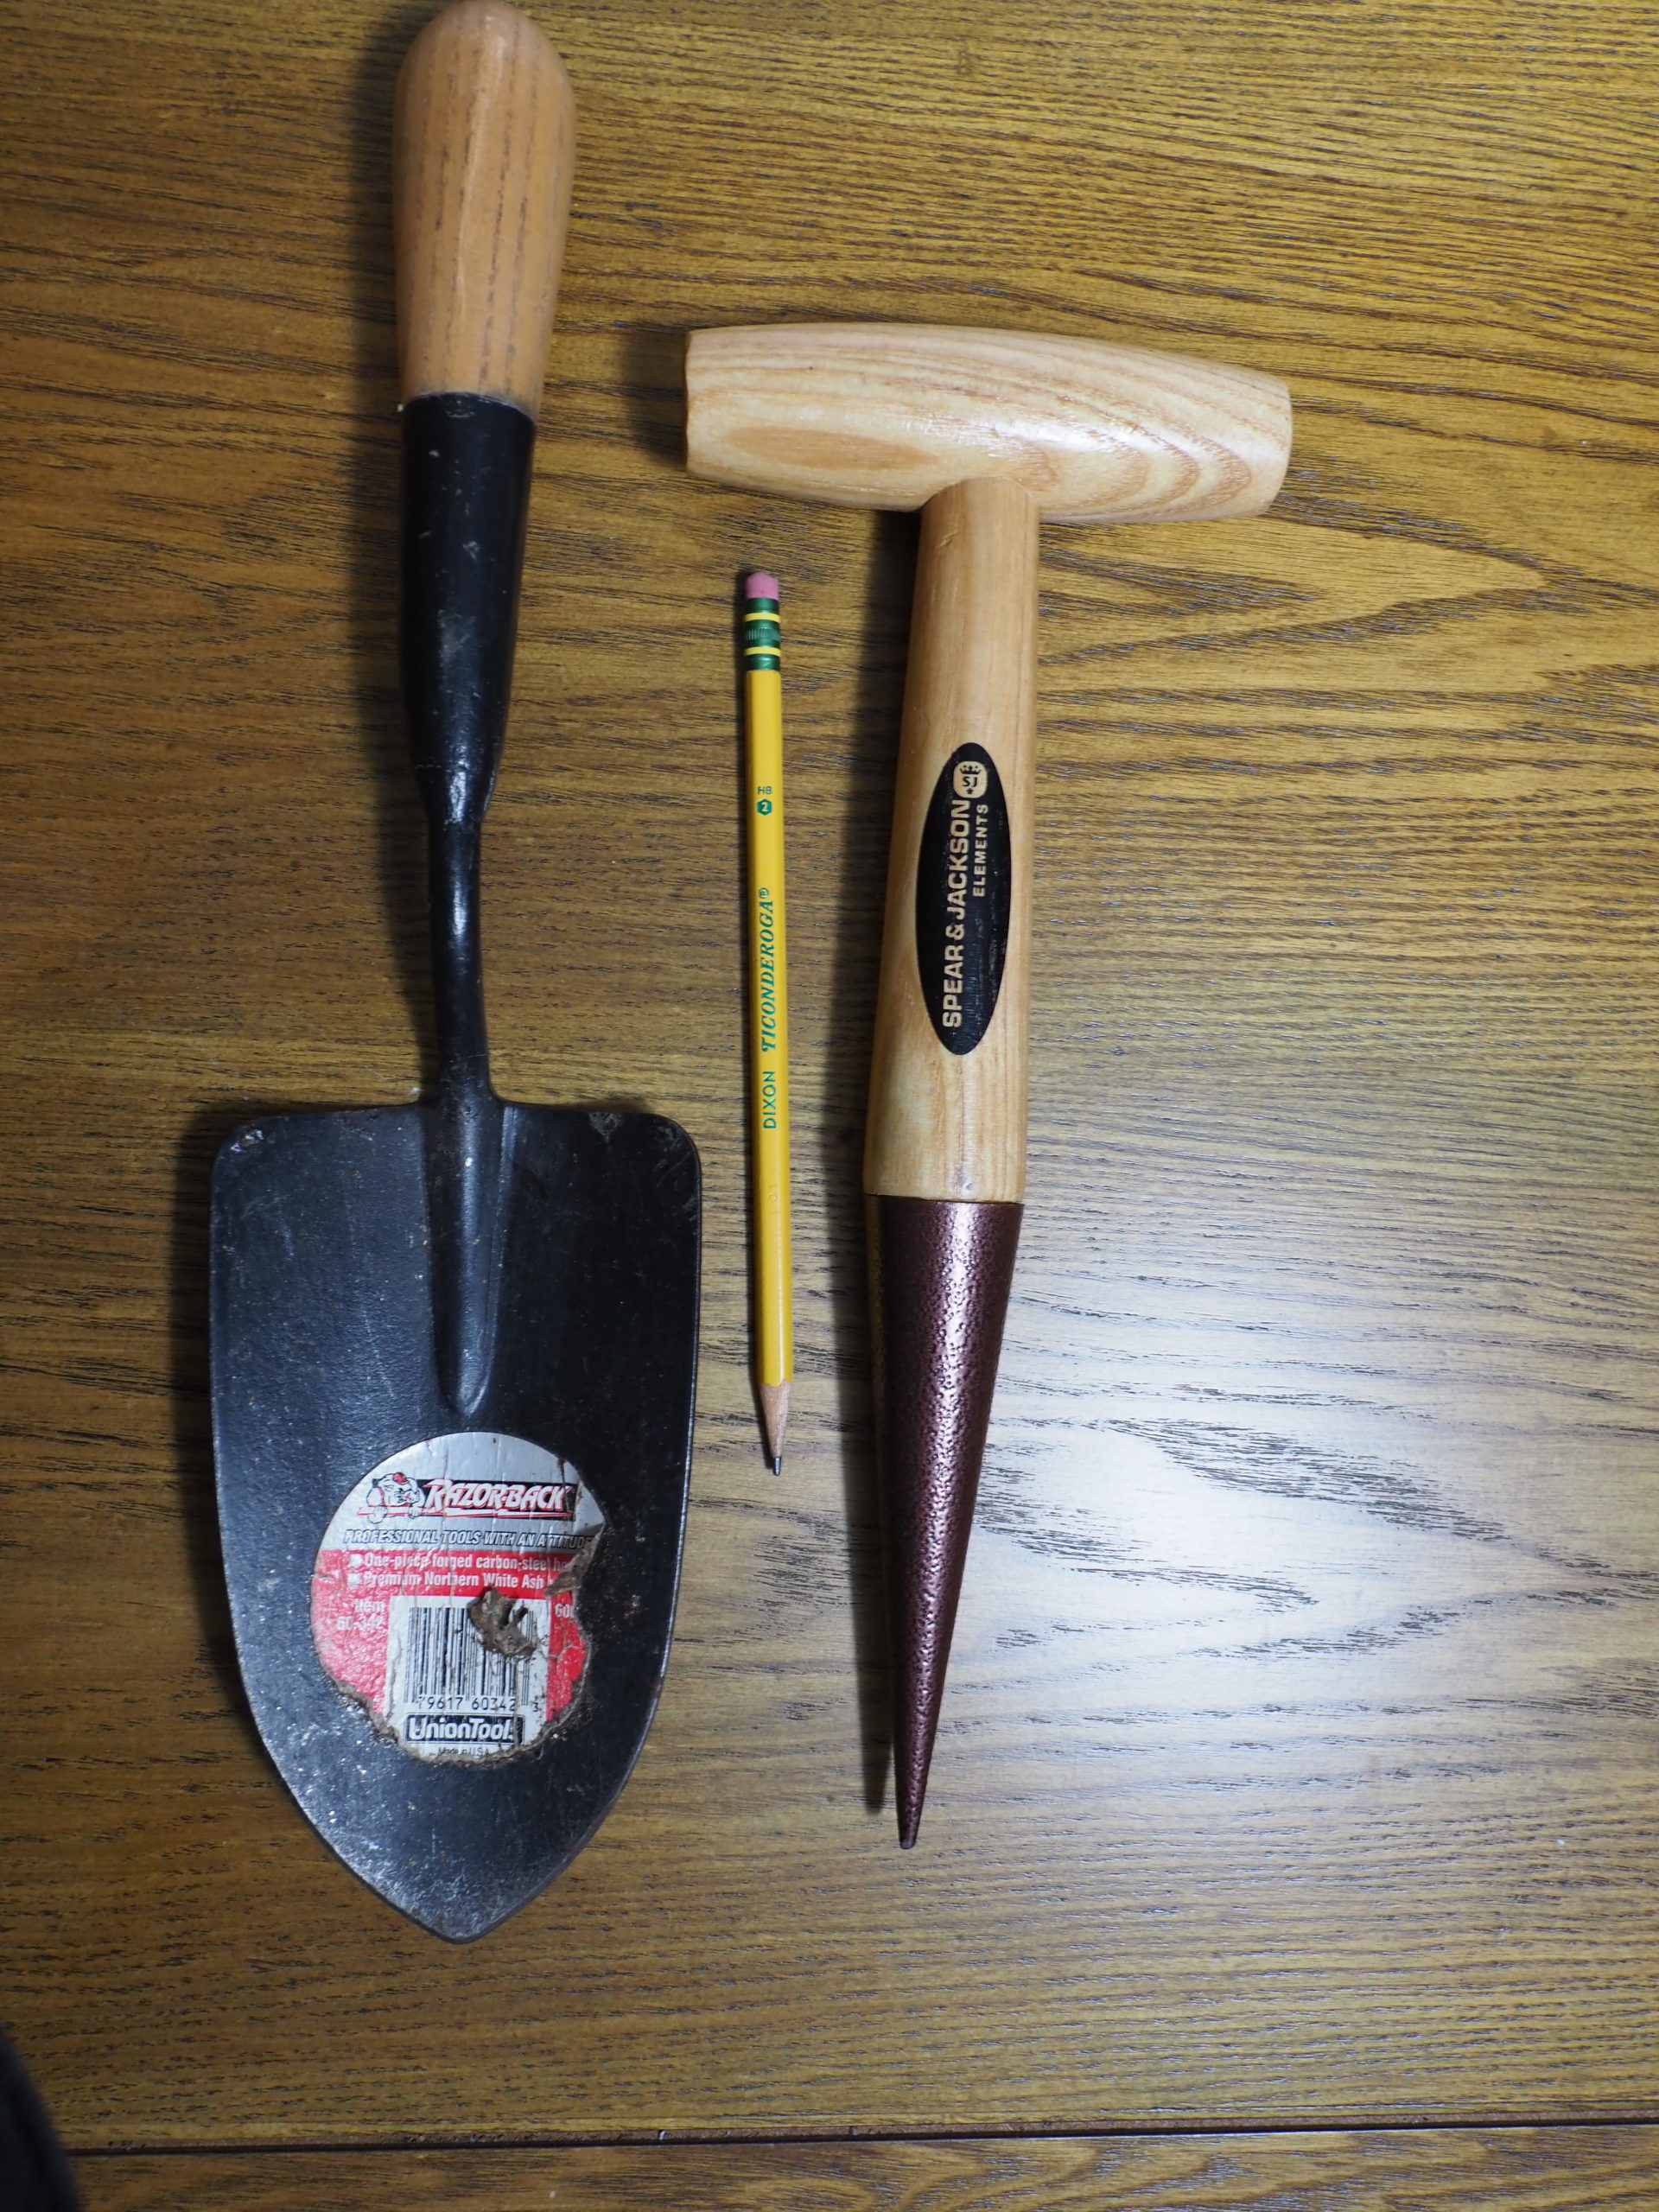 Every gardener should have a garden trowel (left) that won’t bend or break and will last for years. On the right is a T-style garden dibble or dibbler that comes in handy during spring and fall planting times.